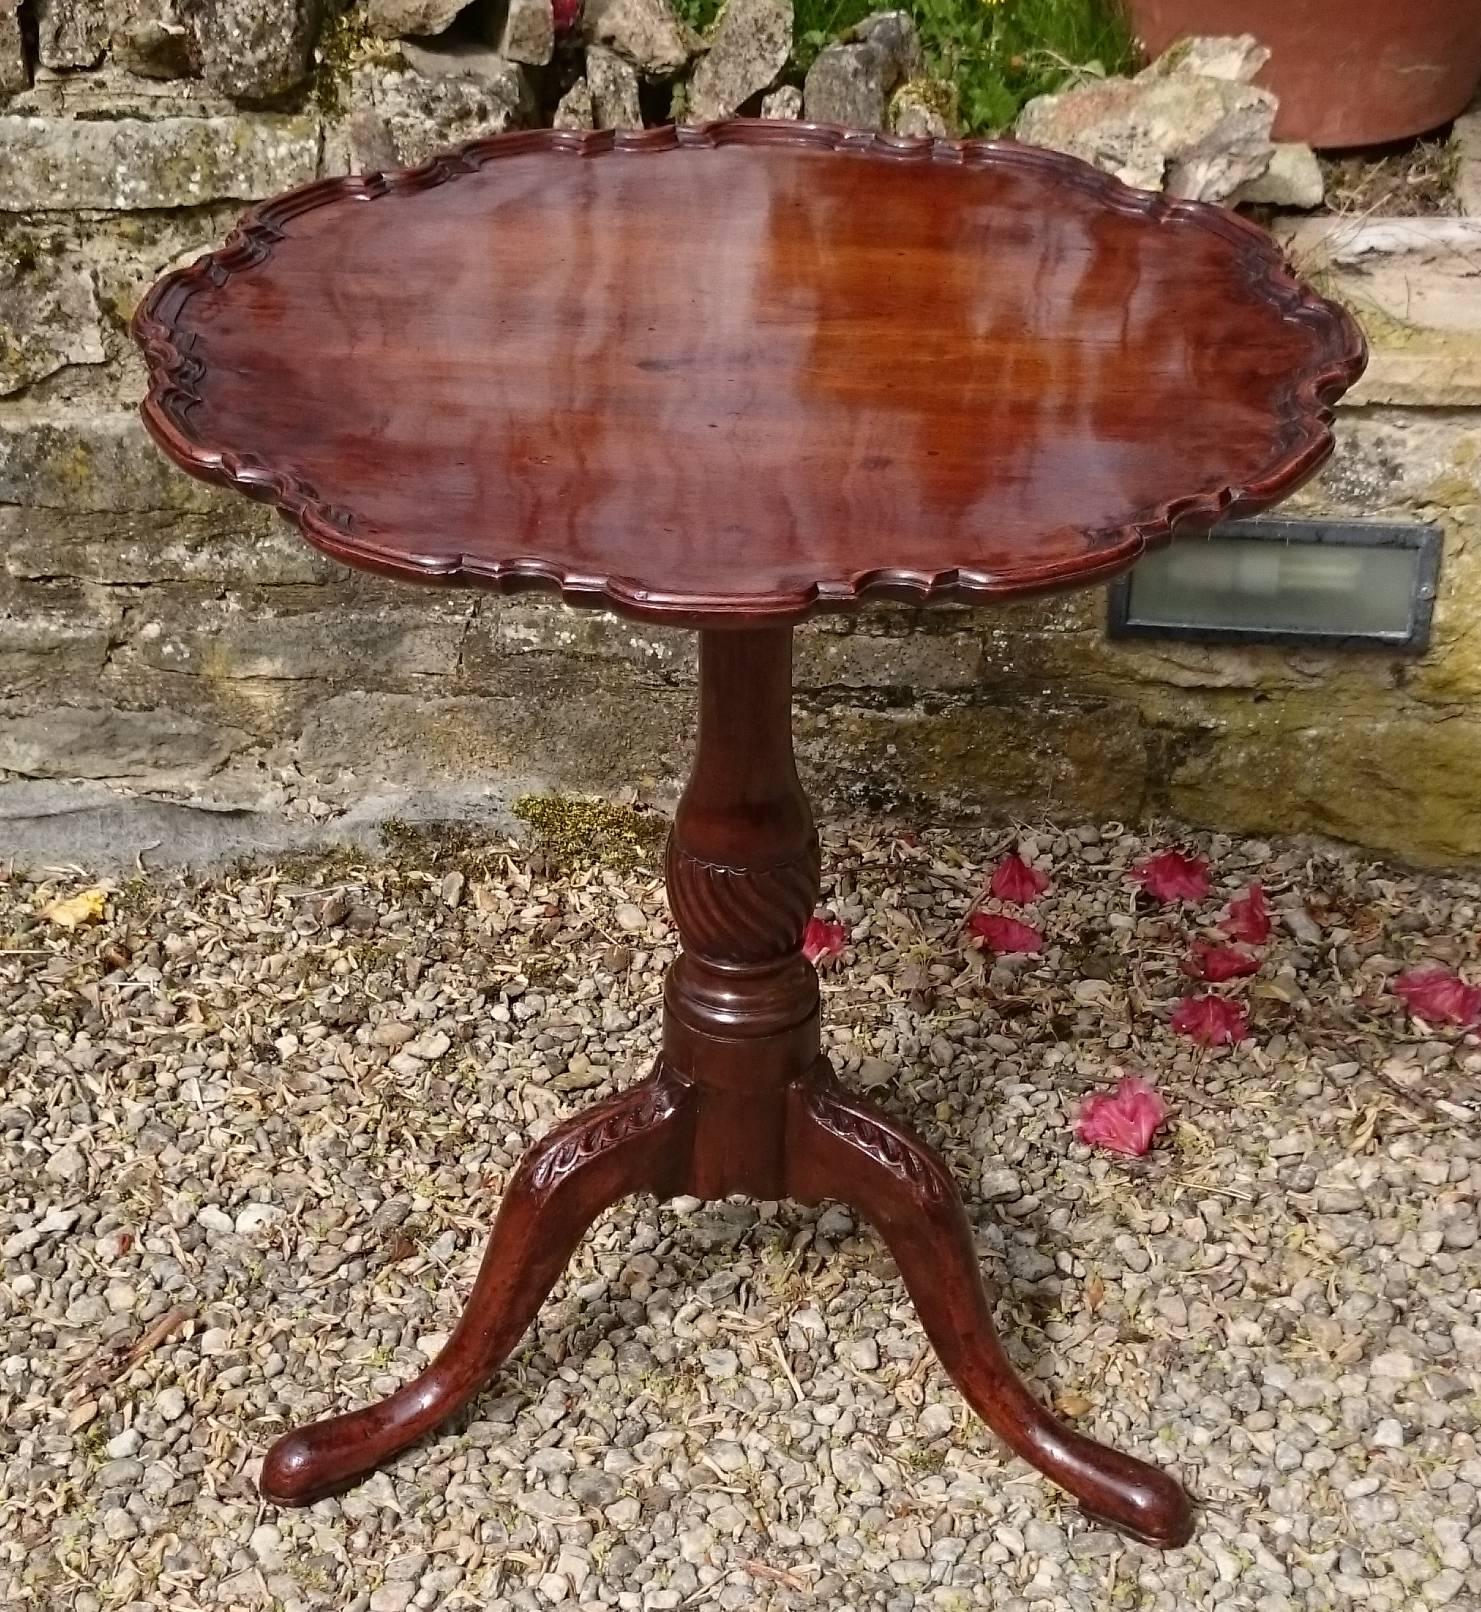 19th century George III revival mahogany antique tripod table. This sort of antique tripod table is sometimes called a wine table, a lamp table, a snap top table, or a small tea table. The edge is generously scalloped and raised above the height of